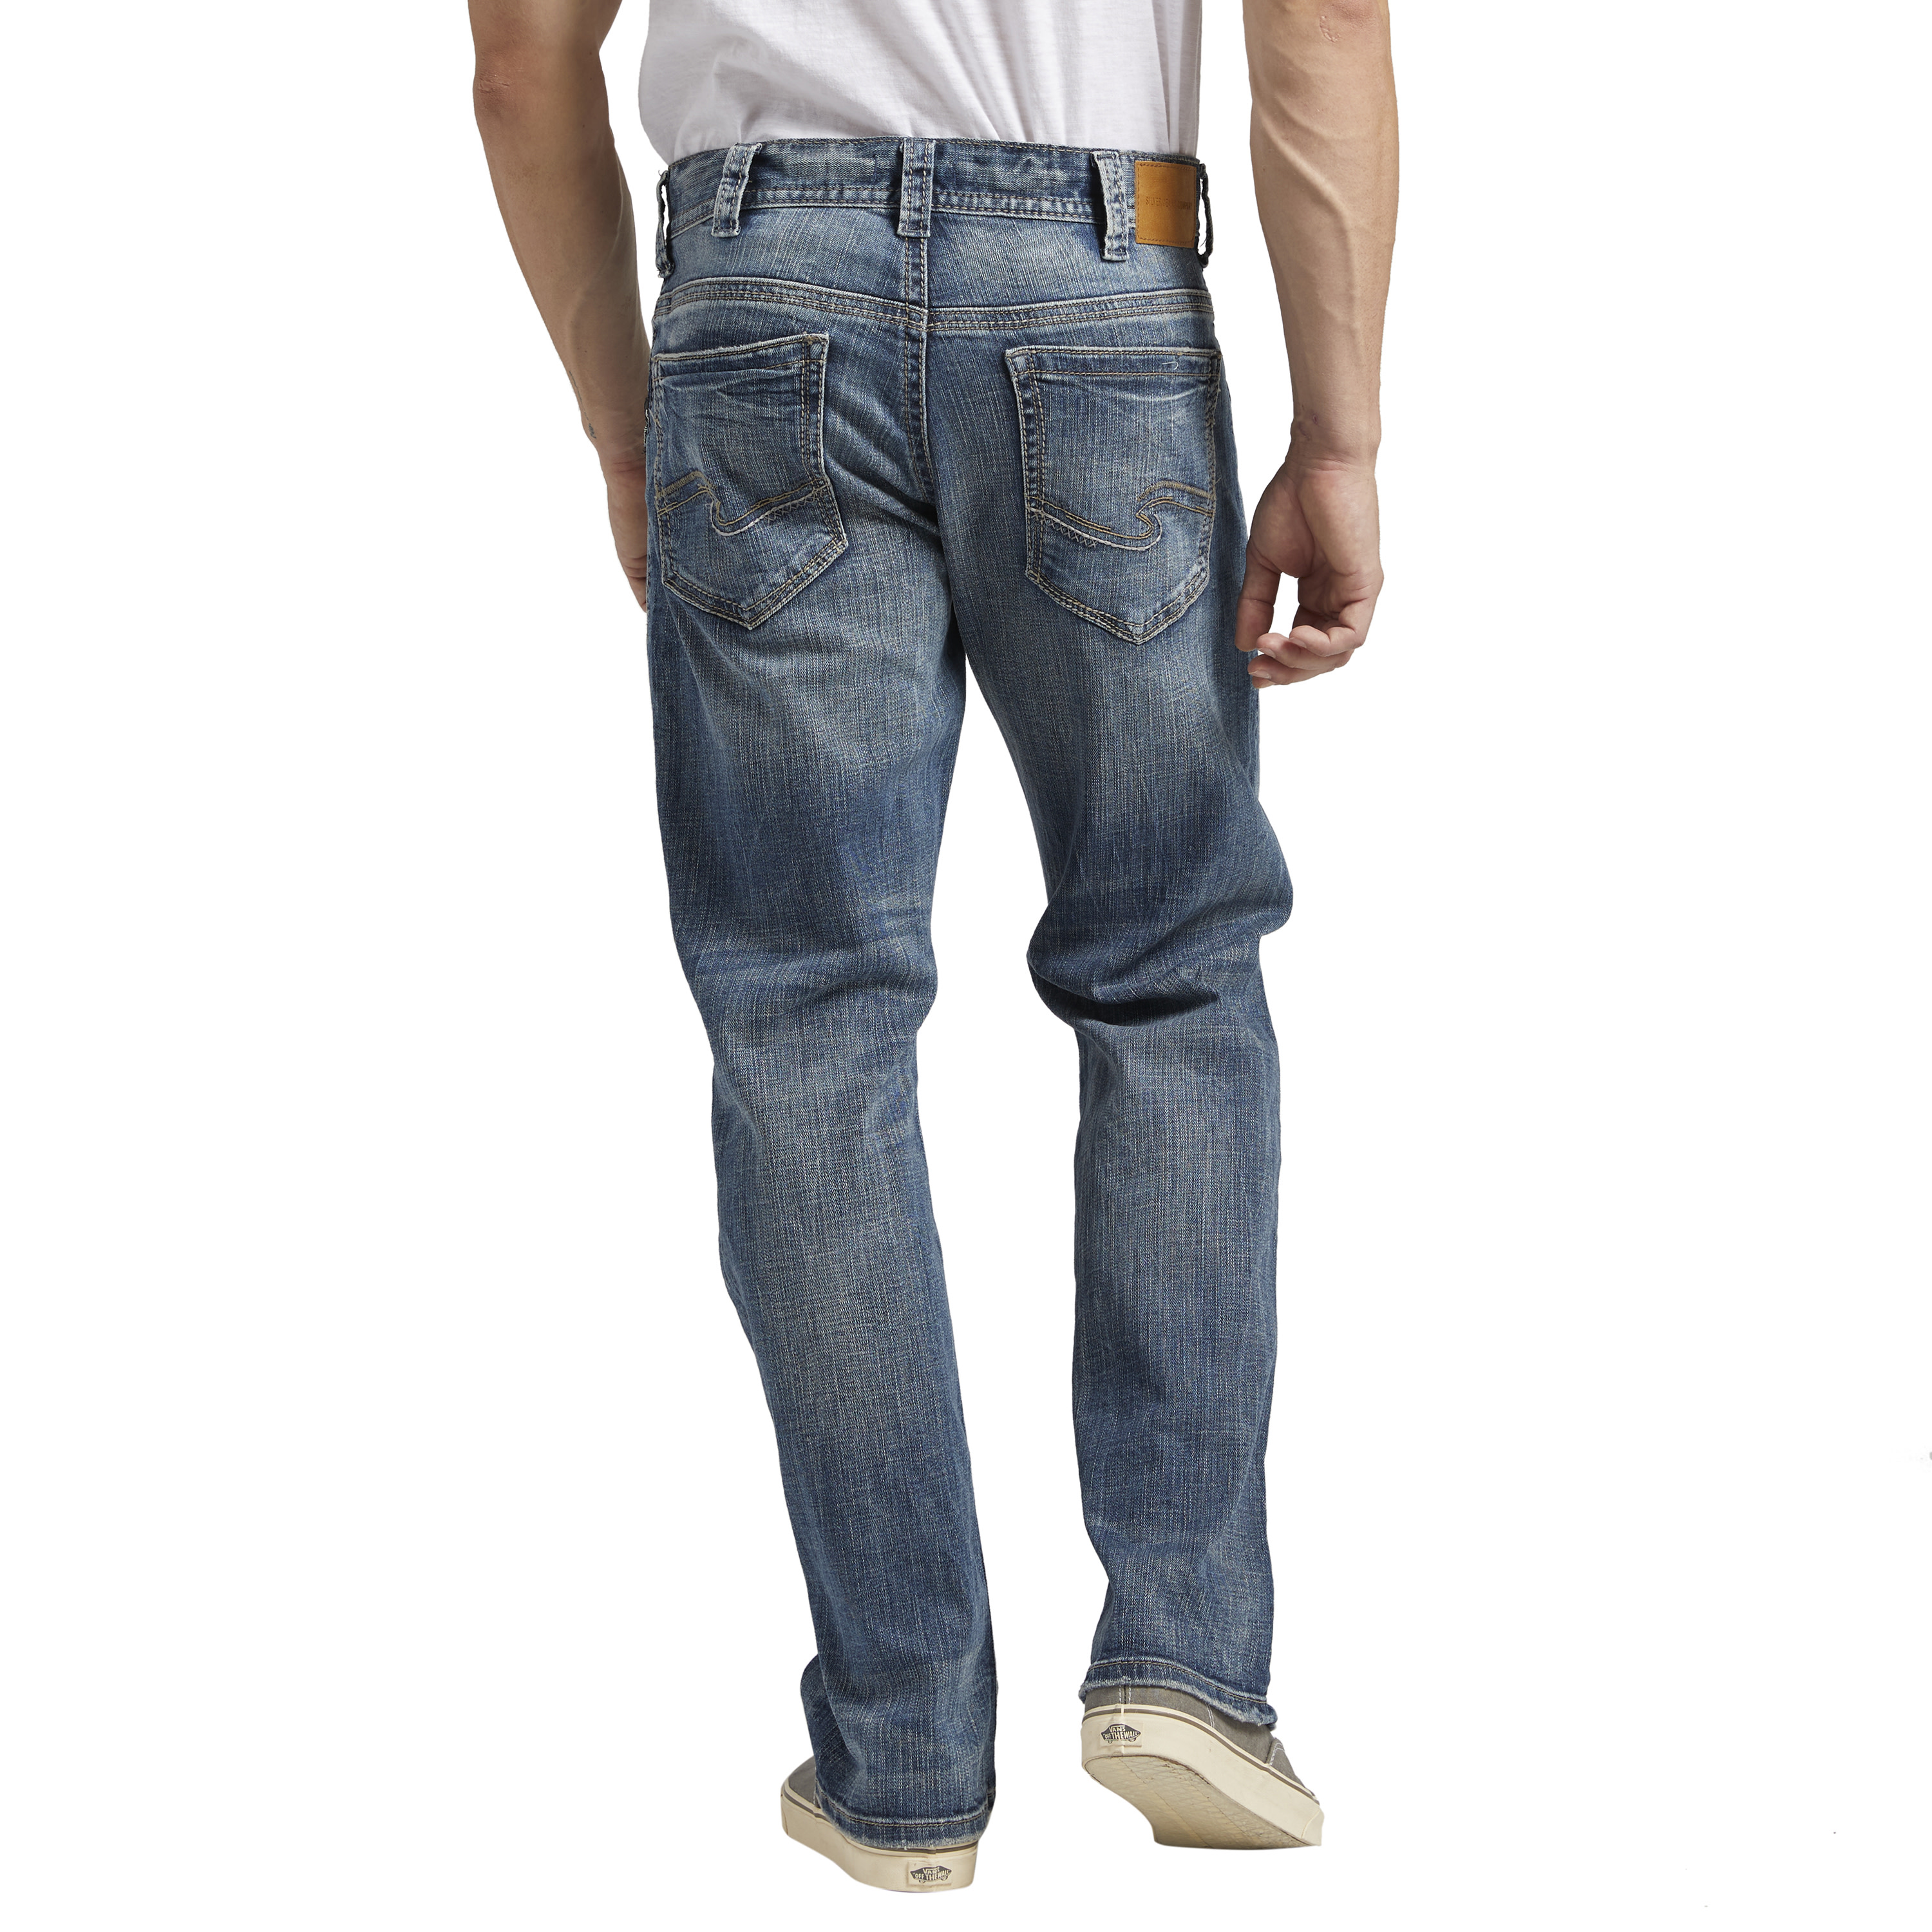 Silver Jeans Co. Men's Gordie Relaxed Fit Straight Leg Jeans, Waist Sizes 30-42 - image 2 of 4